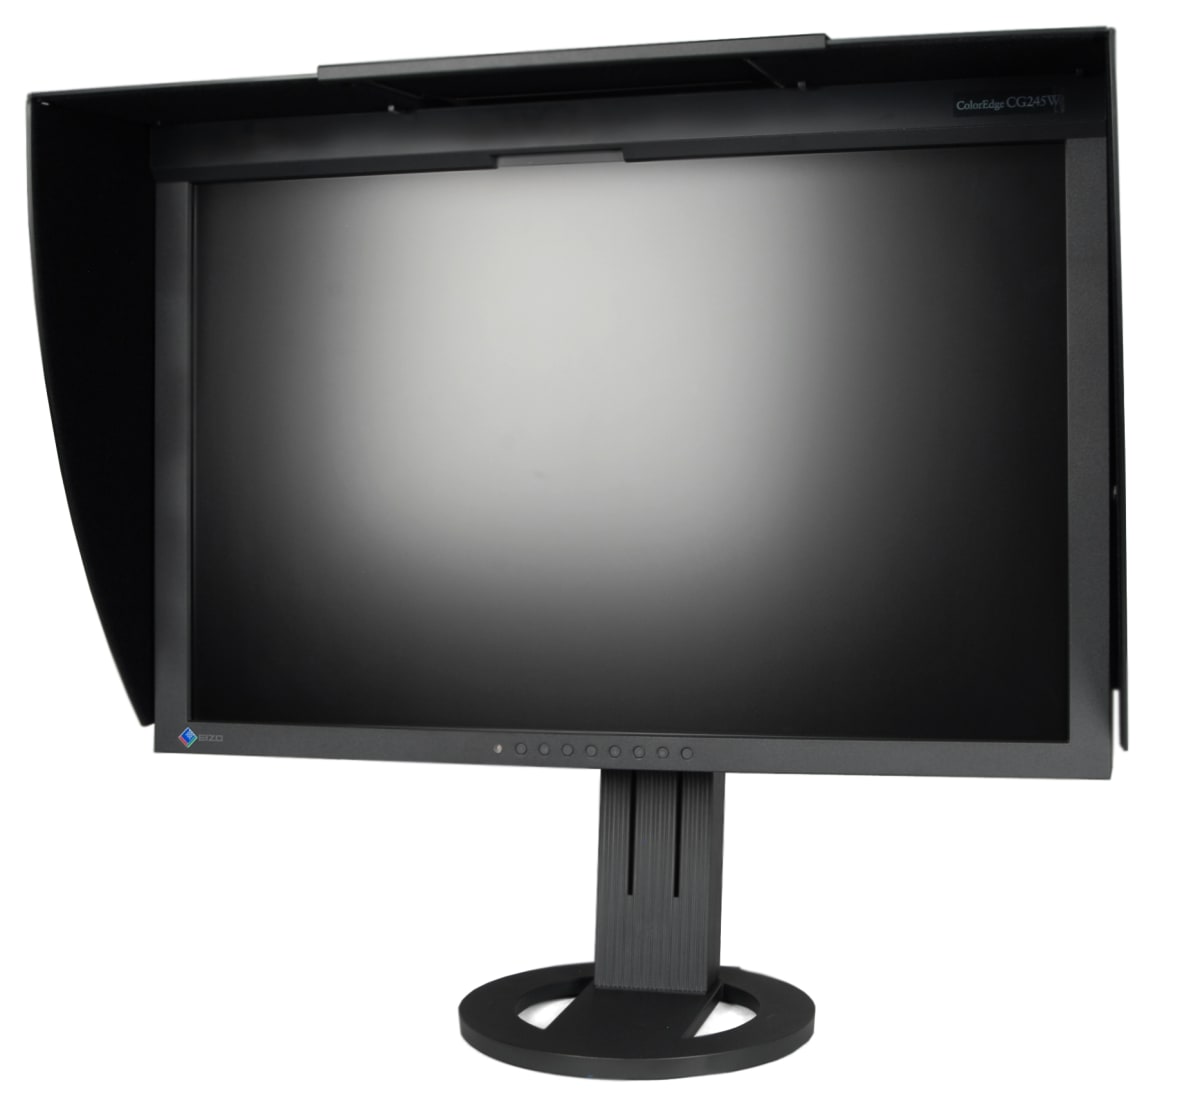 Eizo ColorEdge CG245W Computer Monitor Review - Reviewed